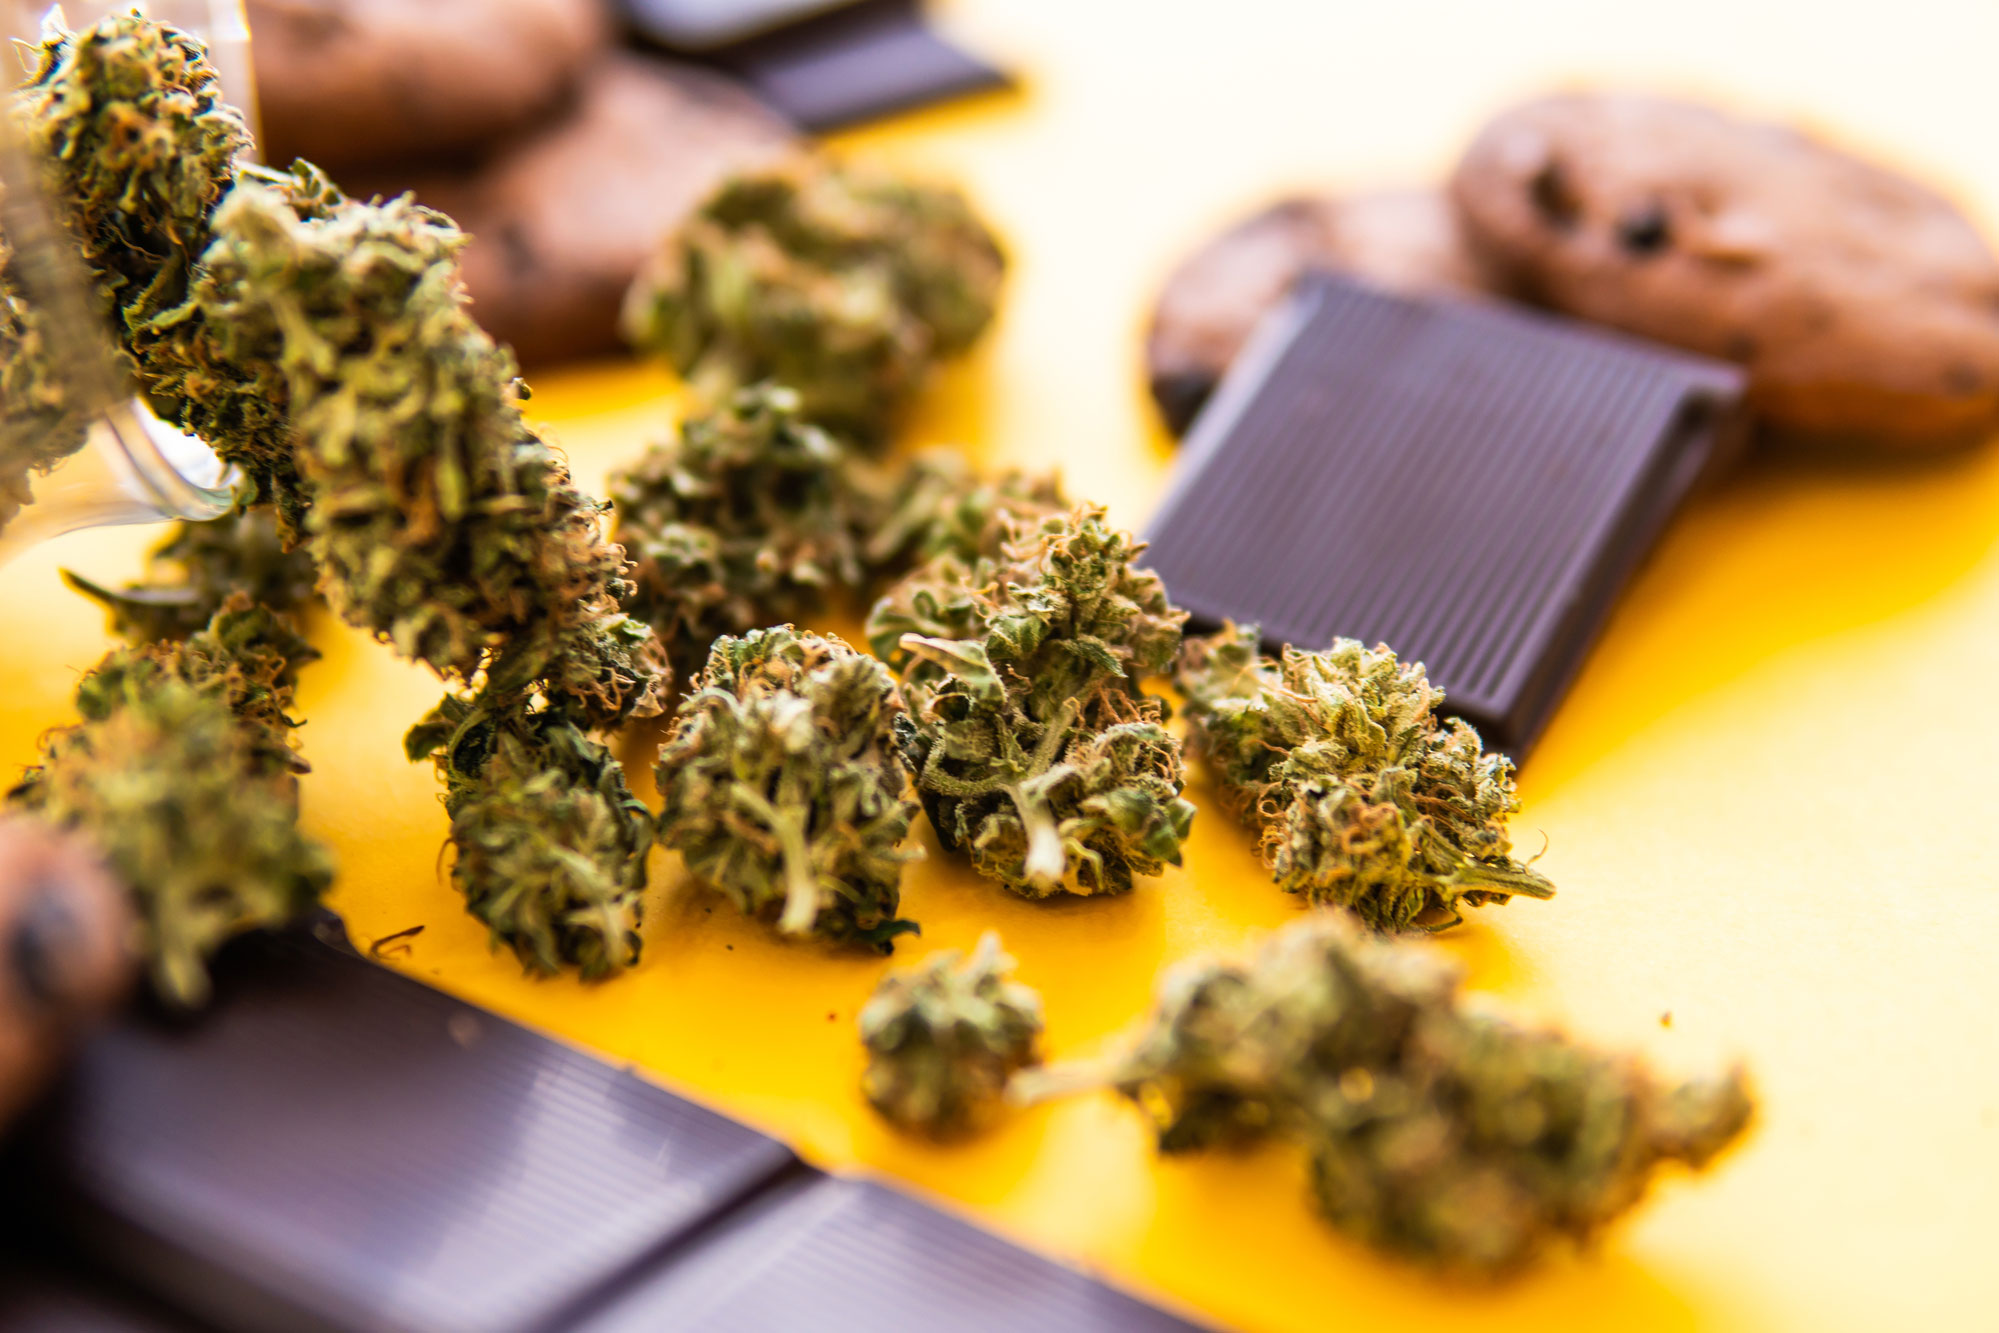 Visiting a Marijuana Dispensary: 8 Things First-Timers Need to Know